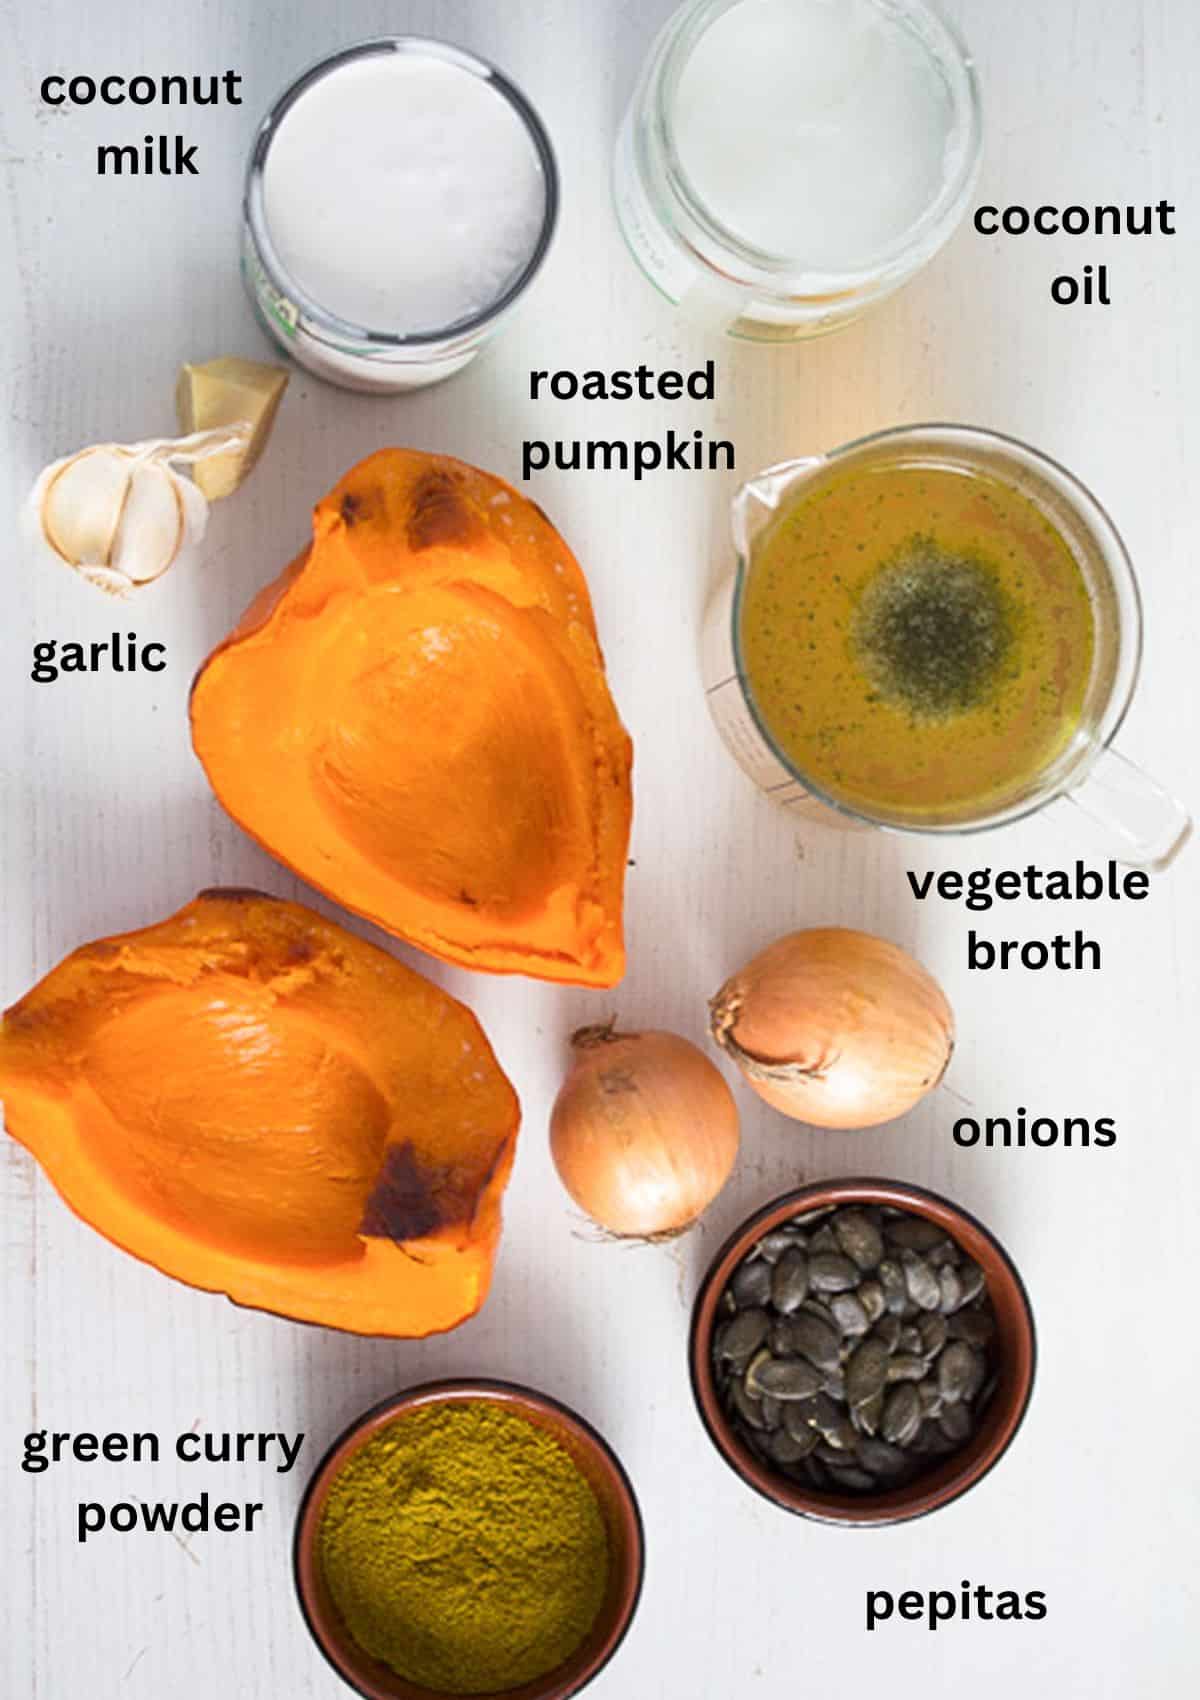 listed ingredients for making pumpkin soup with coconut milk and oil, onions, garlic, curry, stock, and pepitas.